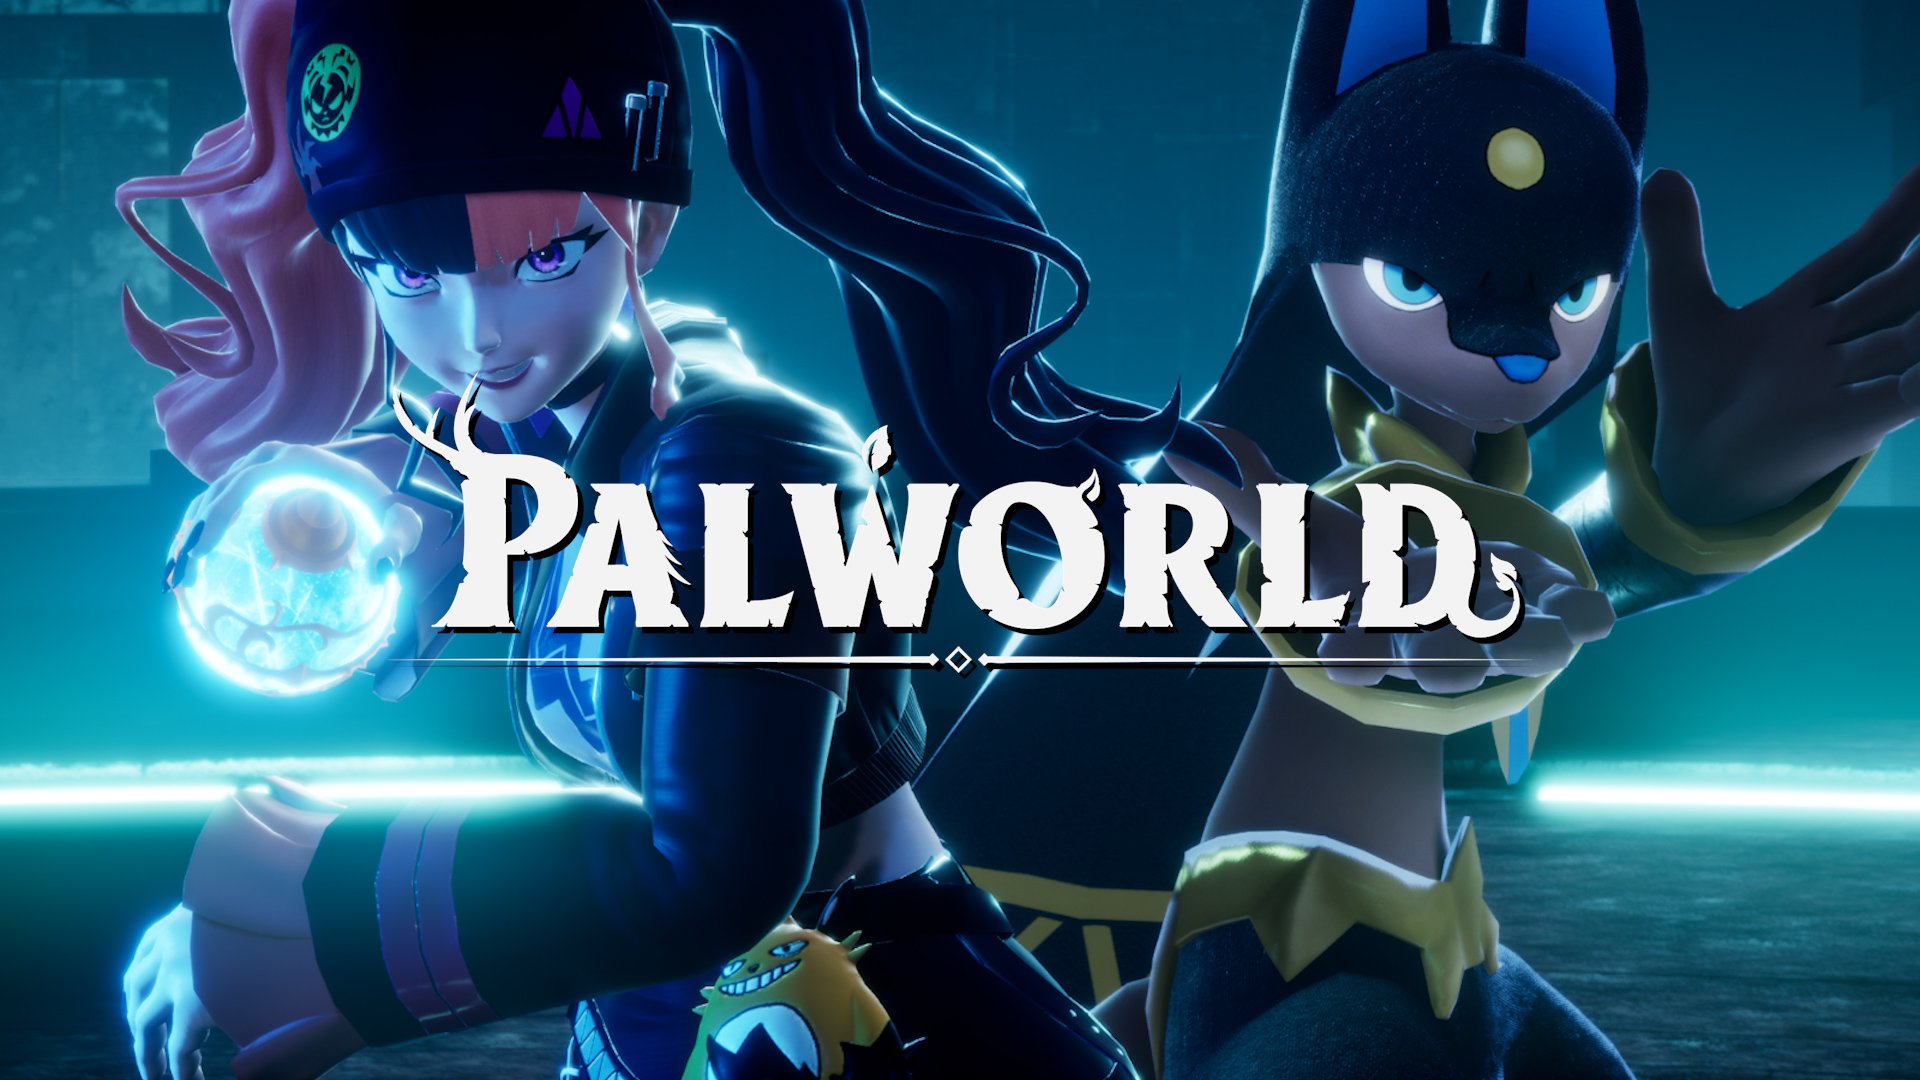 Palworld customization, new field boss, big reveal! # Palworld will release a new trailer at Tokyo Game Show 2023! The latest trailer introduces a lot of new information, including newly